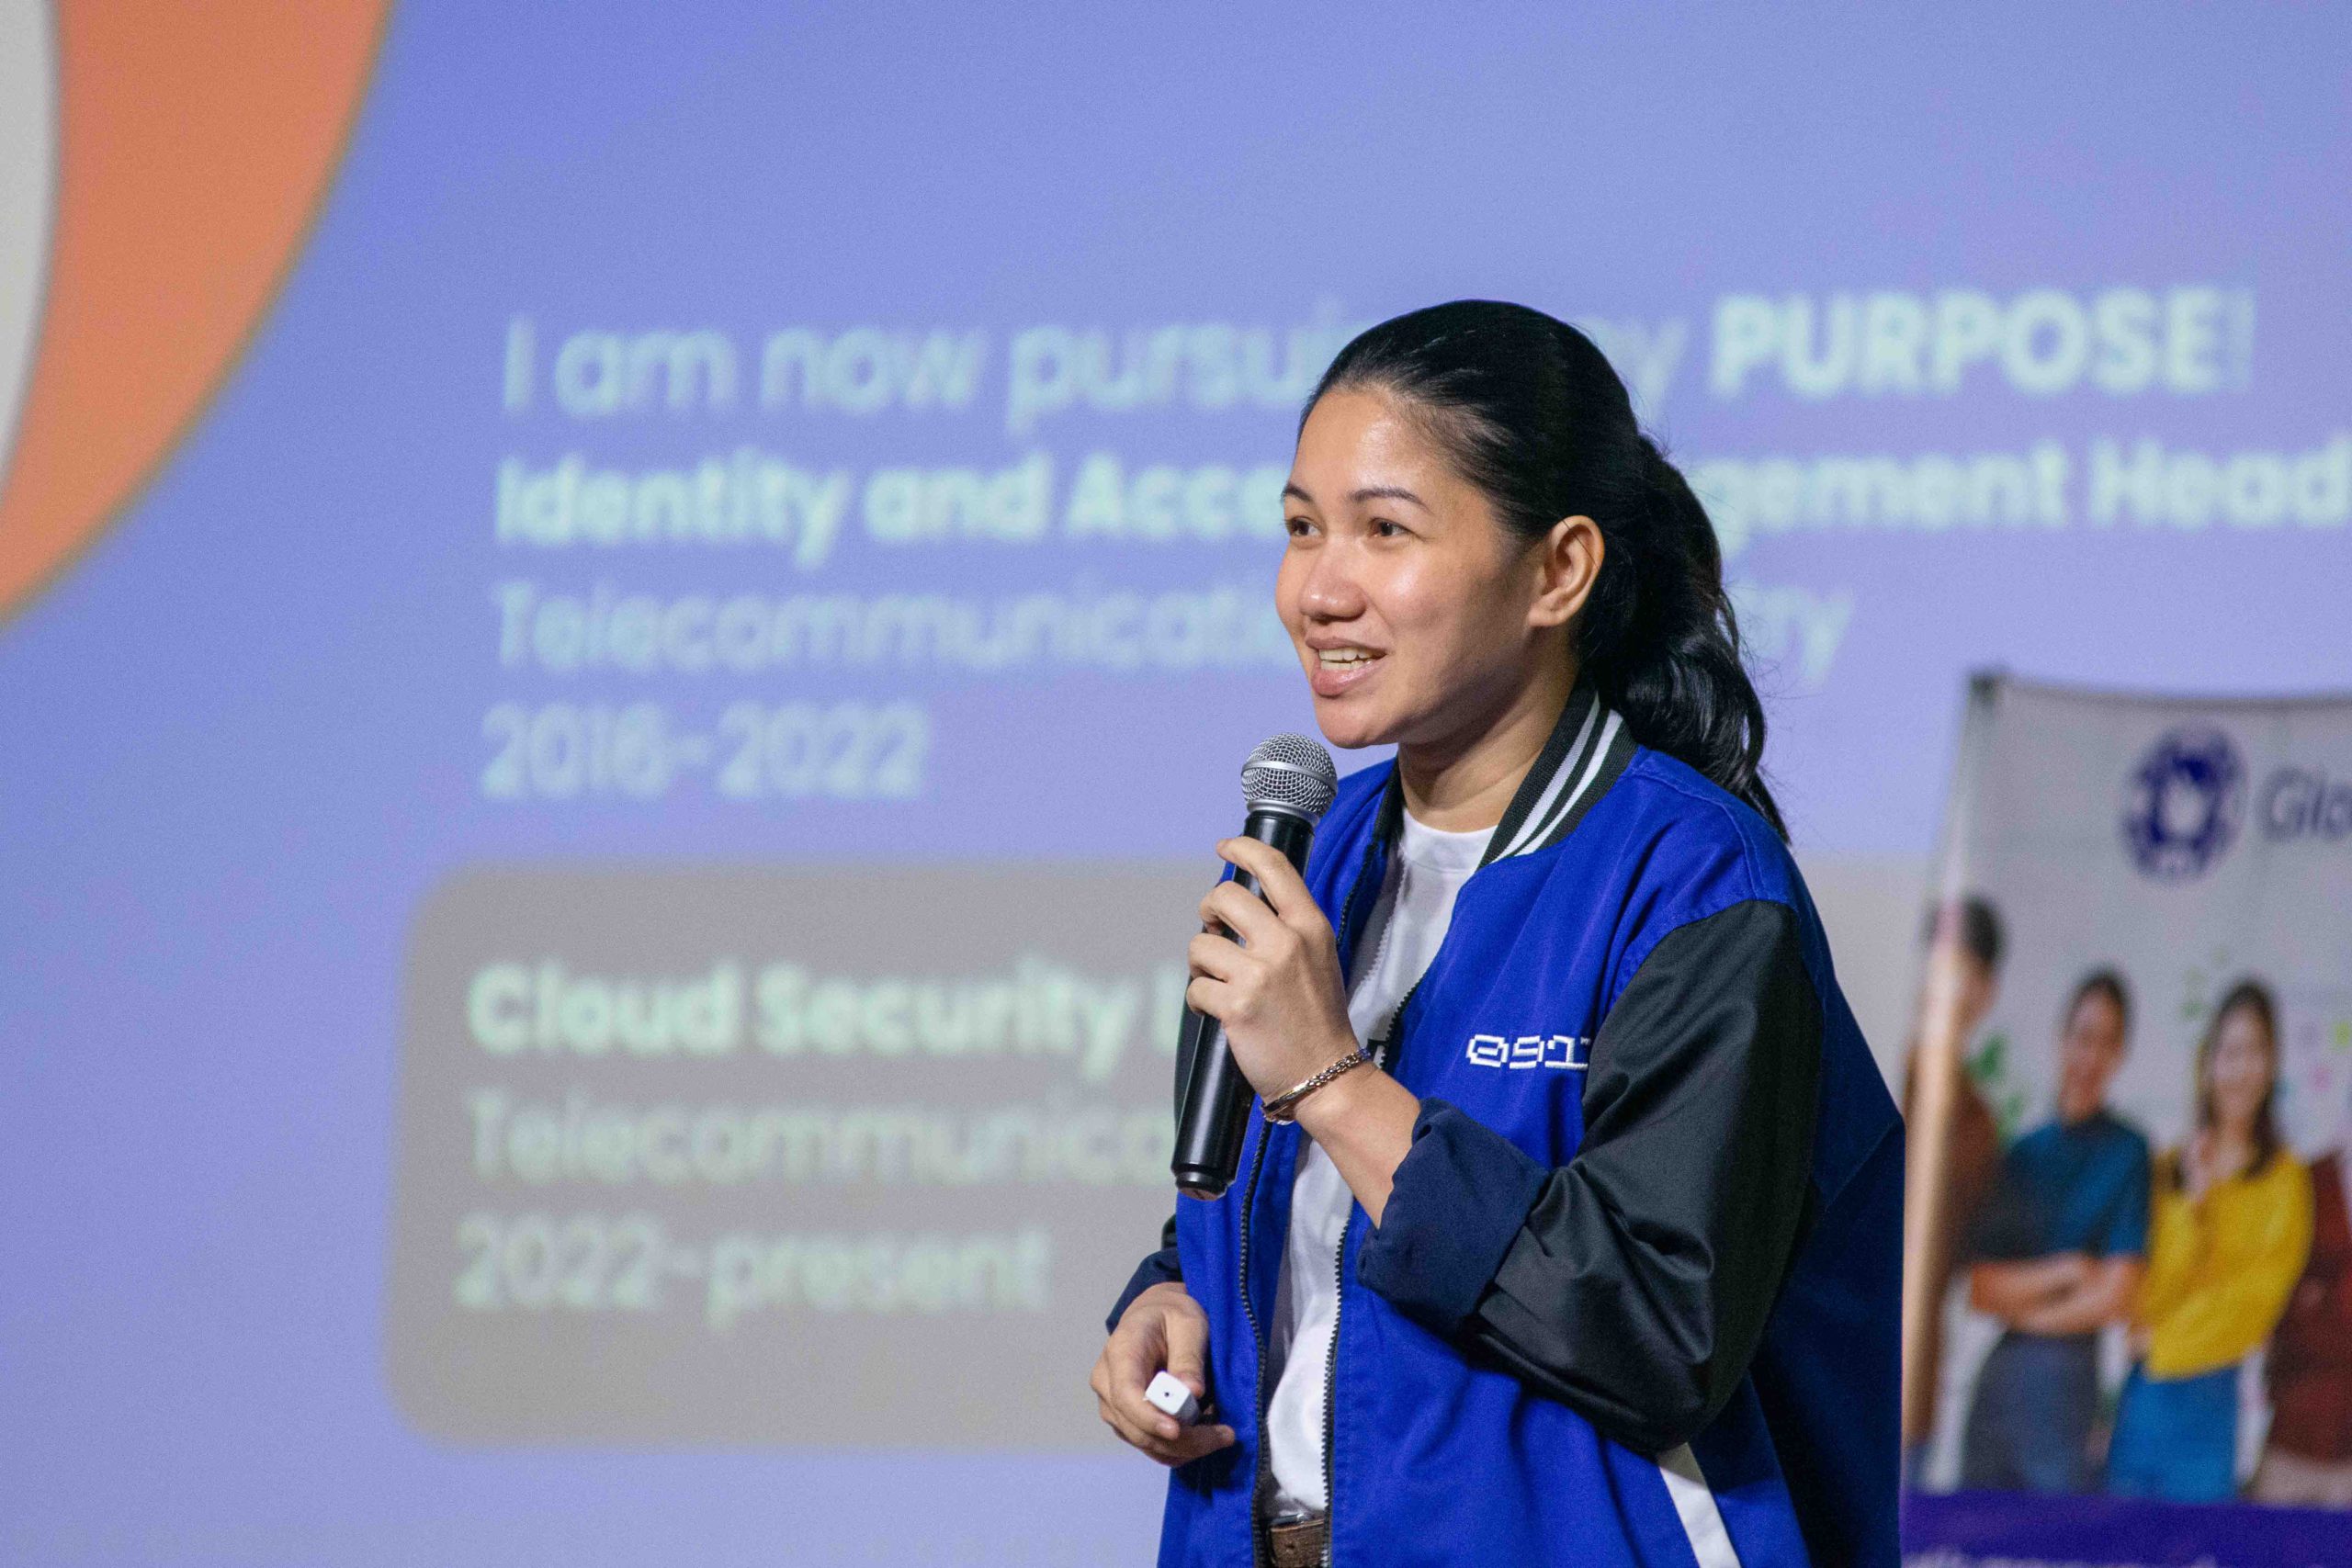 Manager Sharon Torreverde of Globe's Security Engineering reminds students about the importance of cybersecurity and discussed the prevalence of internet fraud.